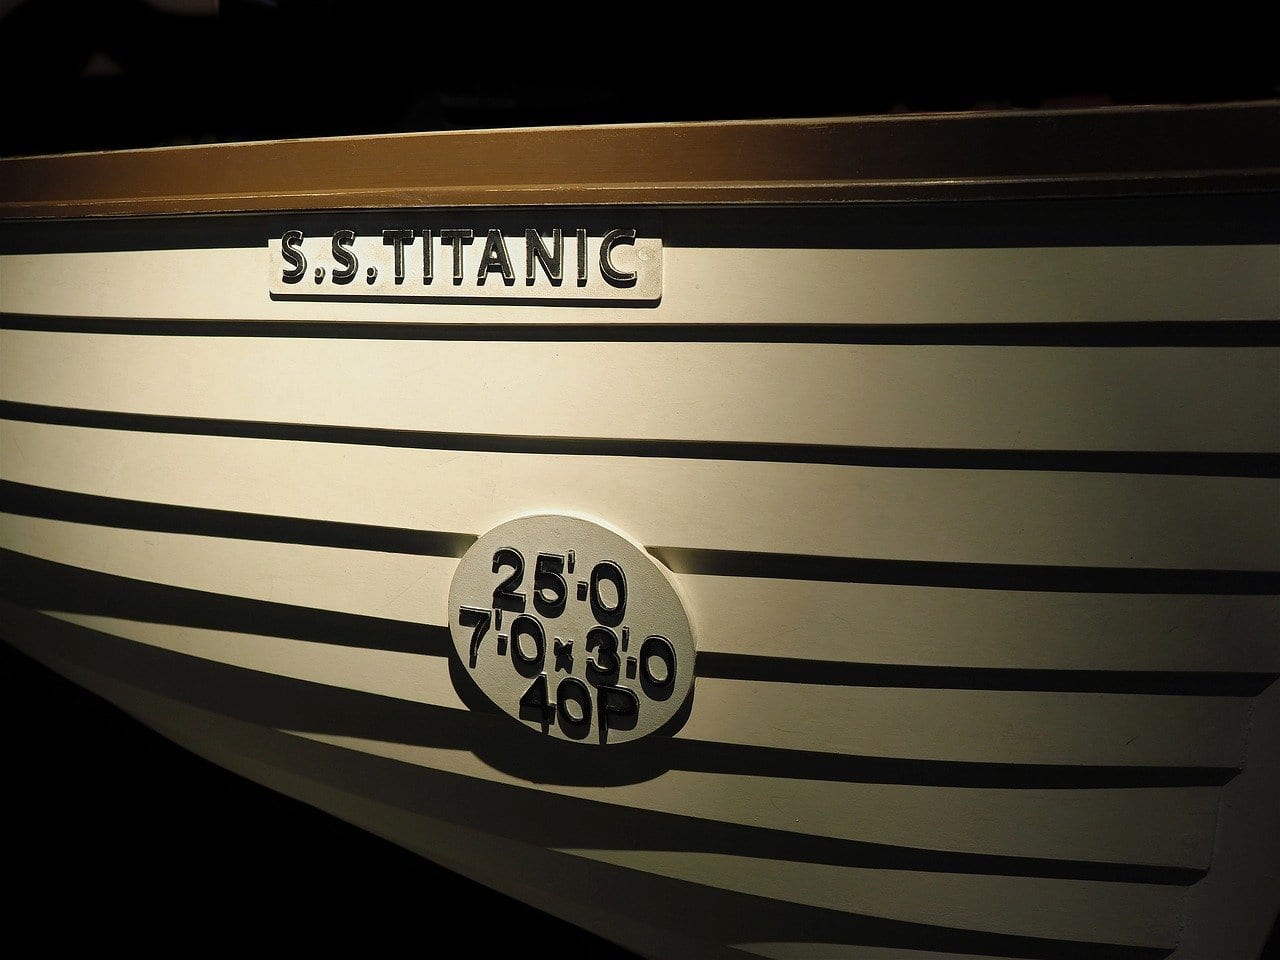 A lifeboat from the Titanic